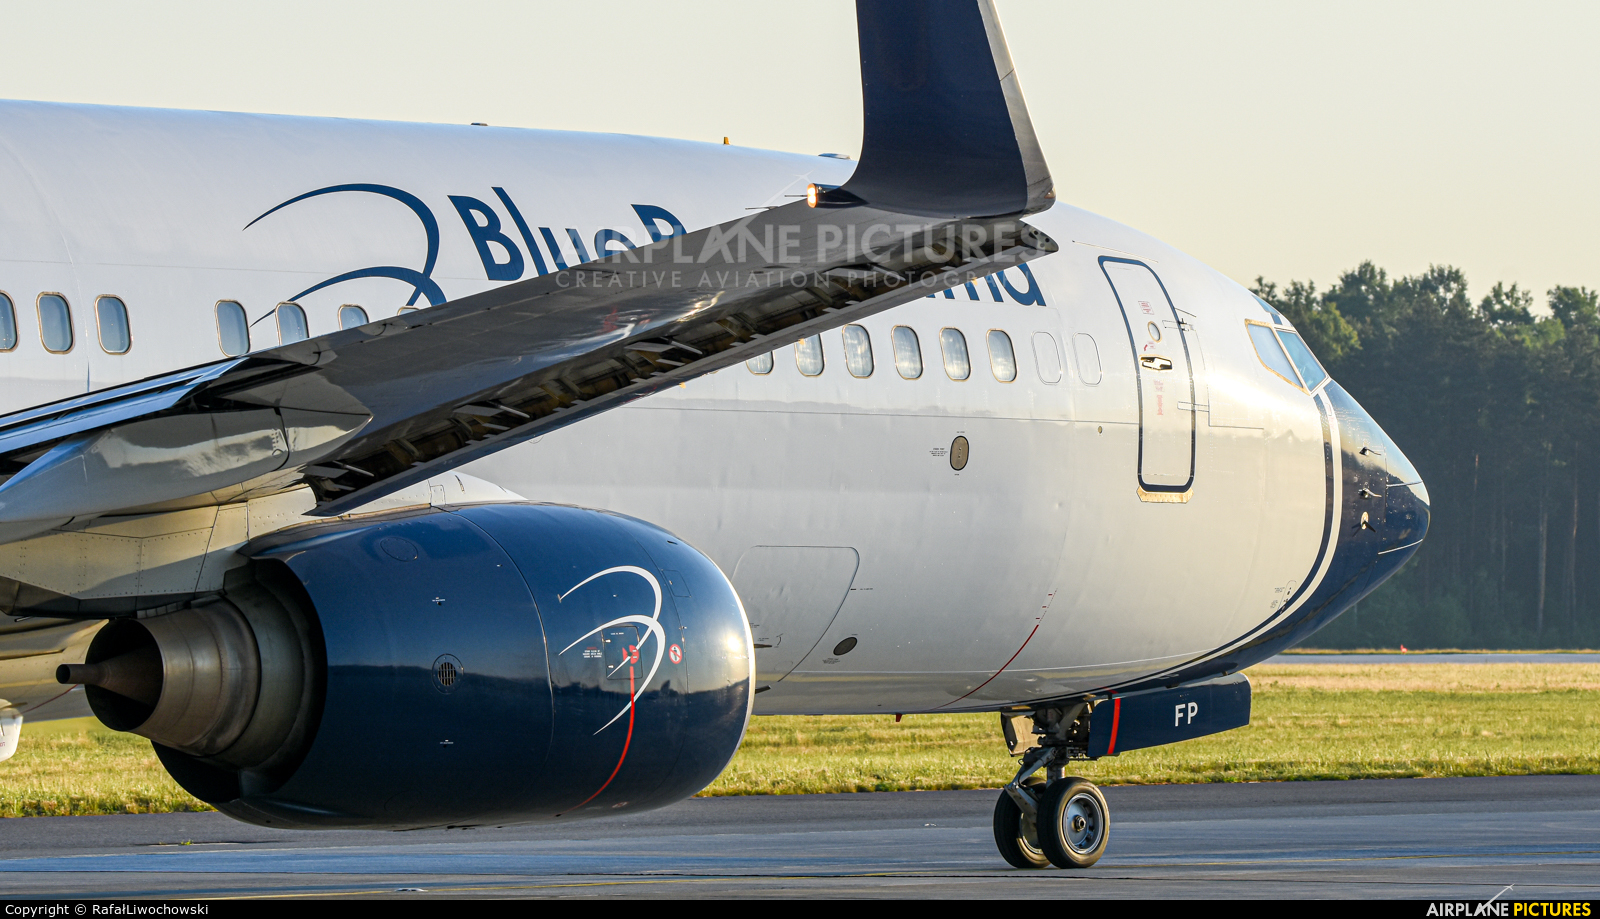 Blue Panorama Airlines 9H-GFP aircraft at Katowice - Pyrzowice